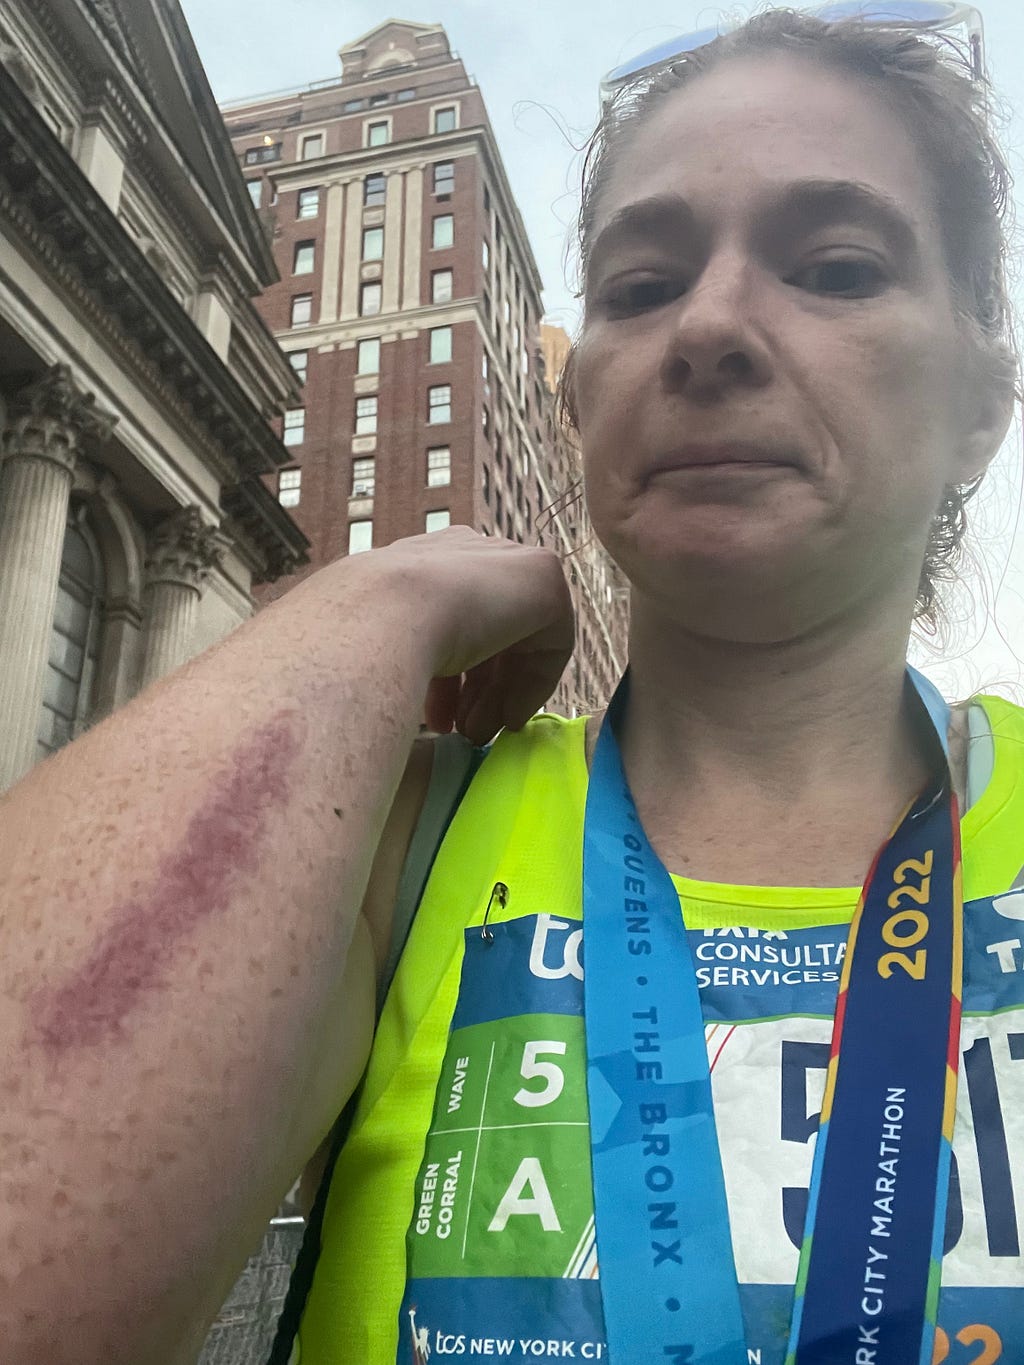 The road rash after cleaning my arm off with some water at the medic tent at the NYC marathon in 2022